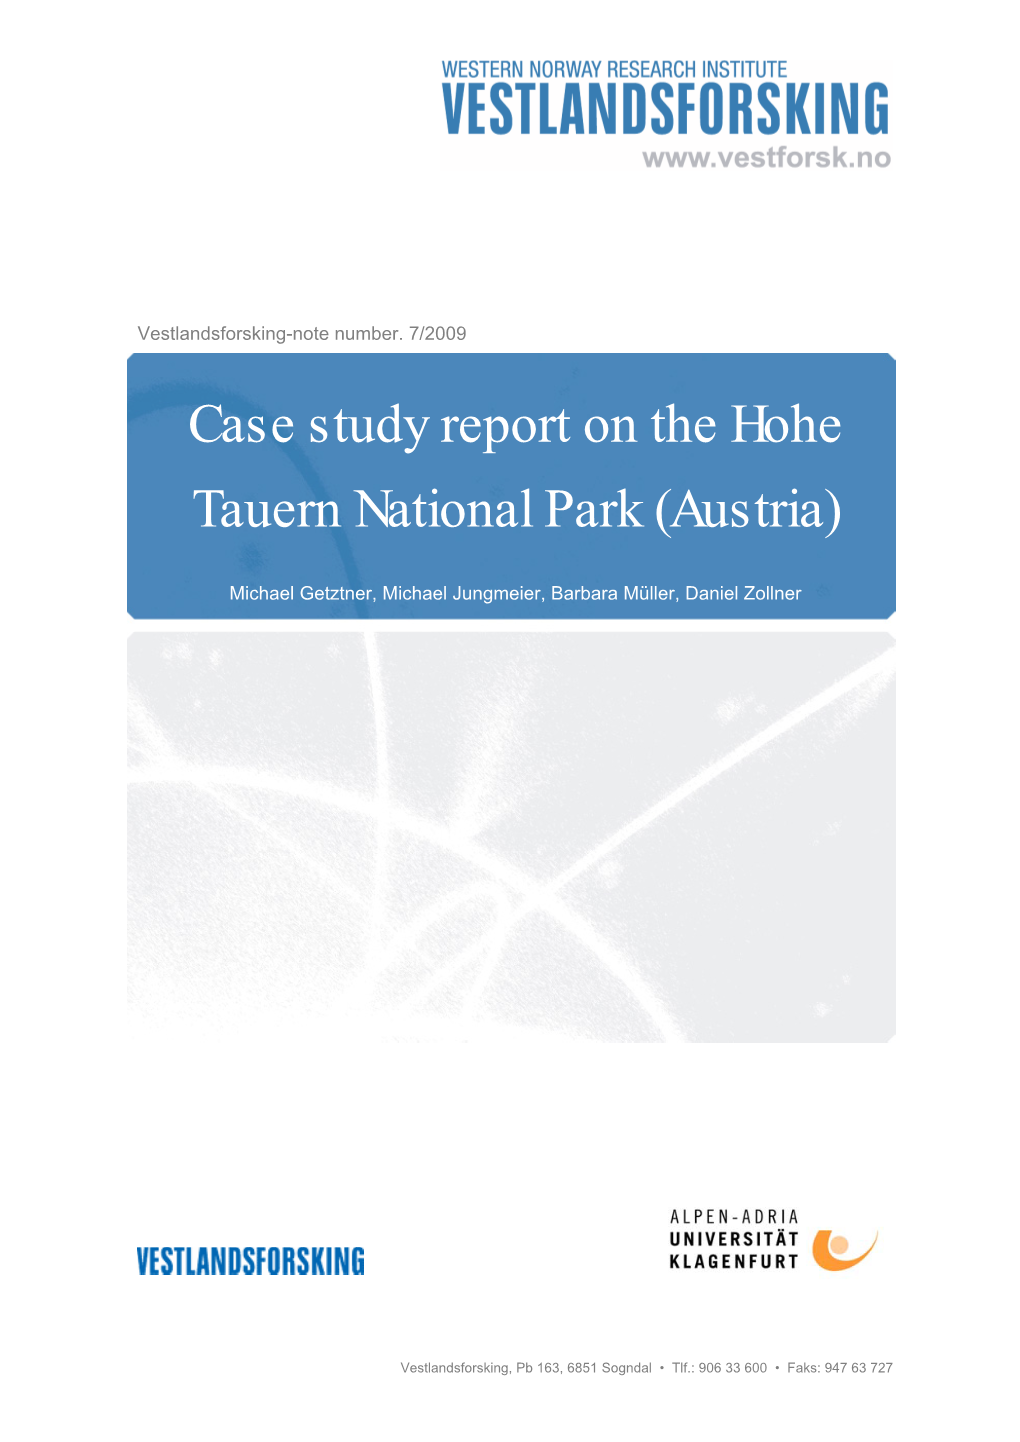 Case Study Report on the Hohe Tauern National Park (Austria)